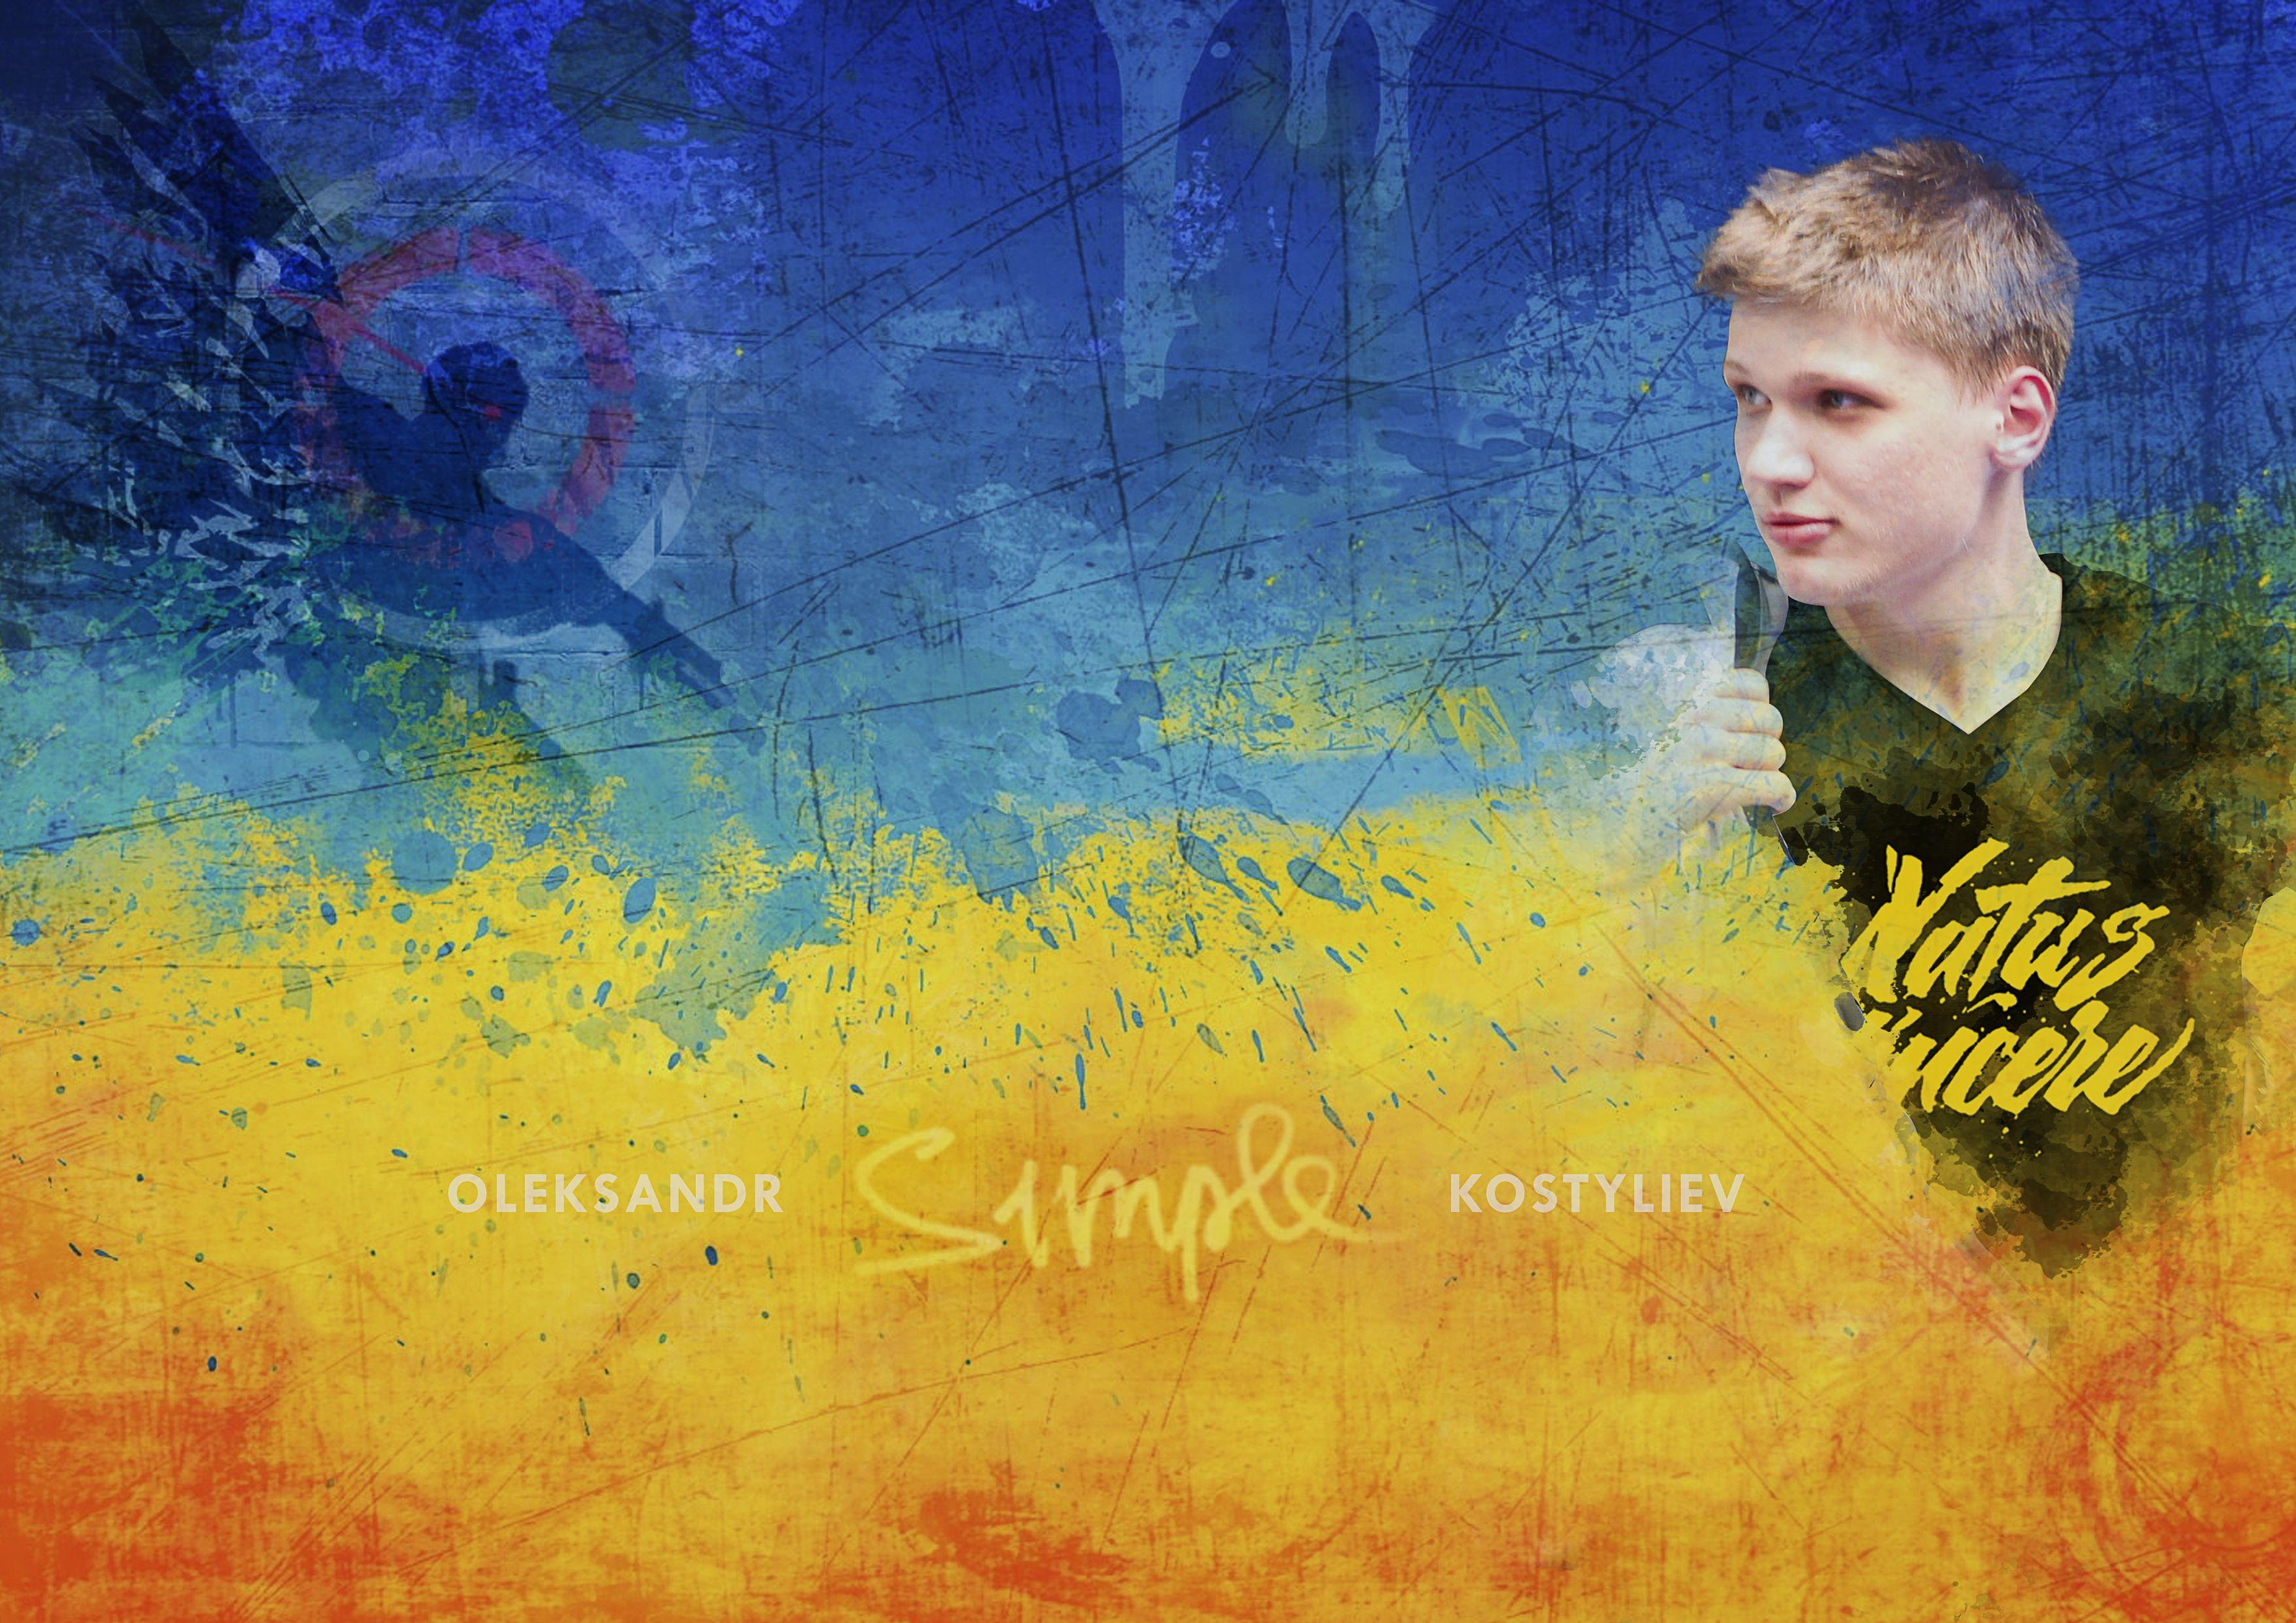 Just a s1mple wallpaper #games #globaloffensive #CSGO #counterstrike